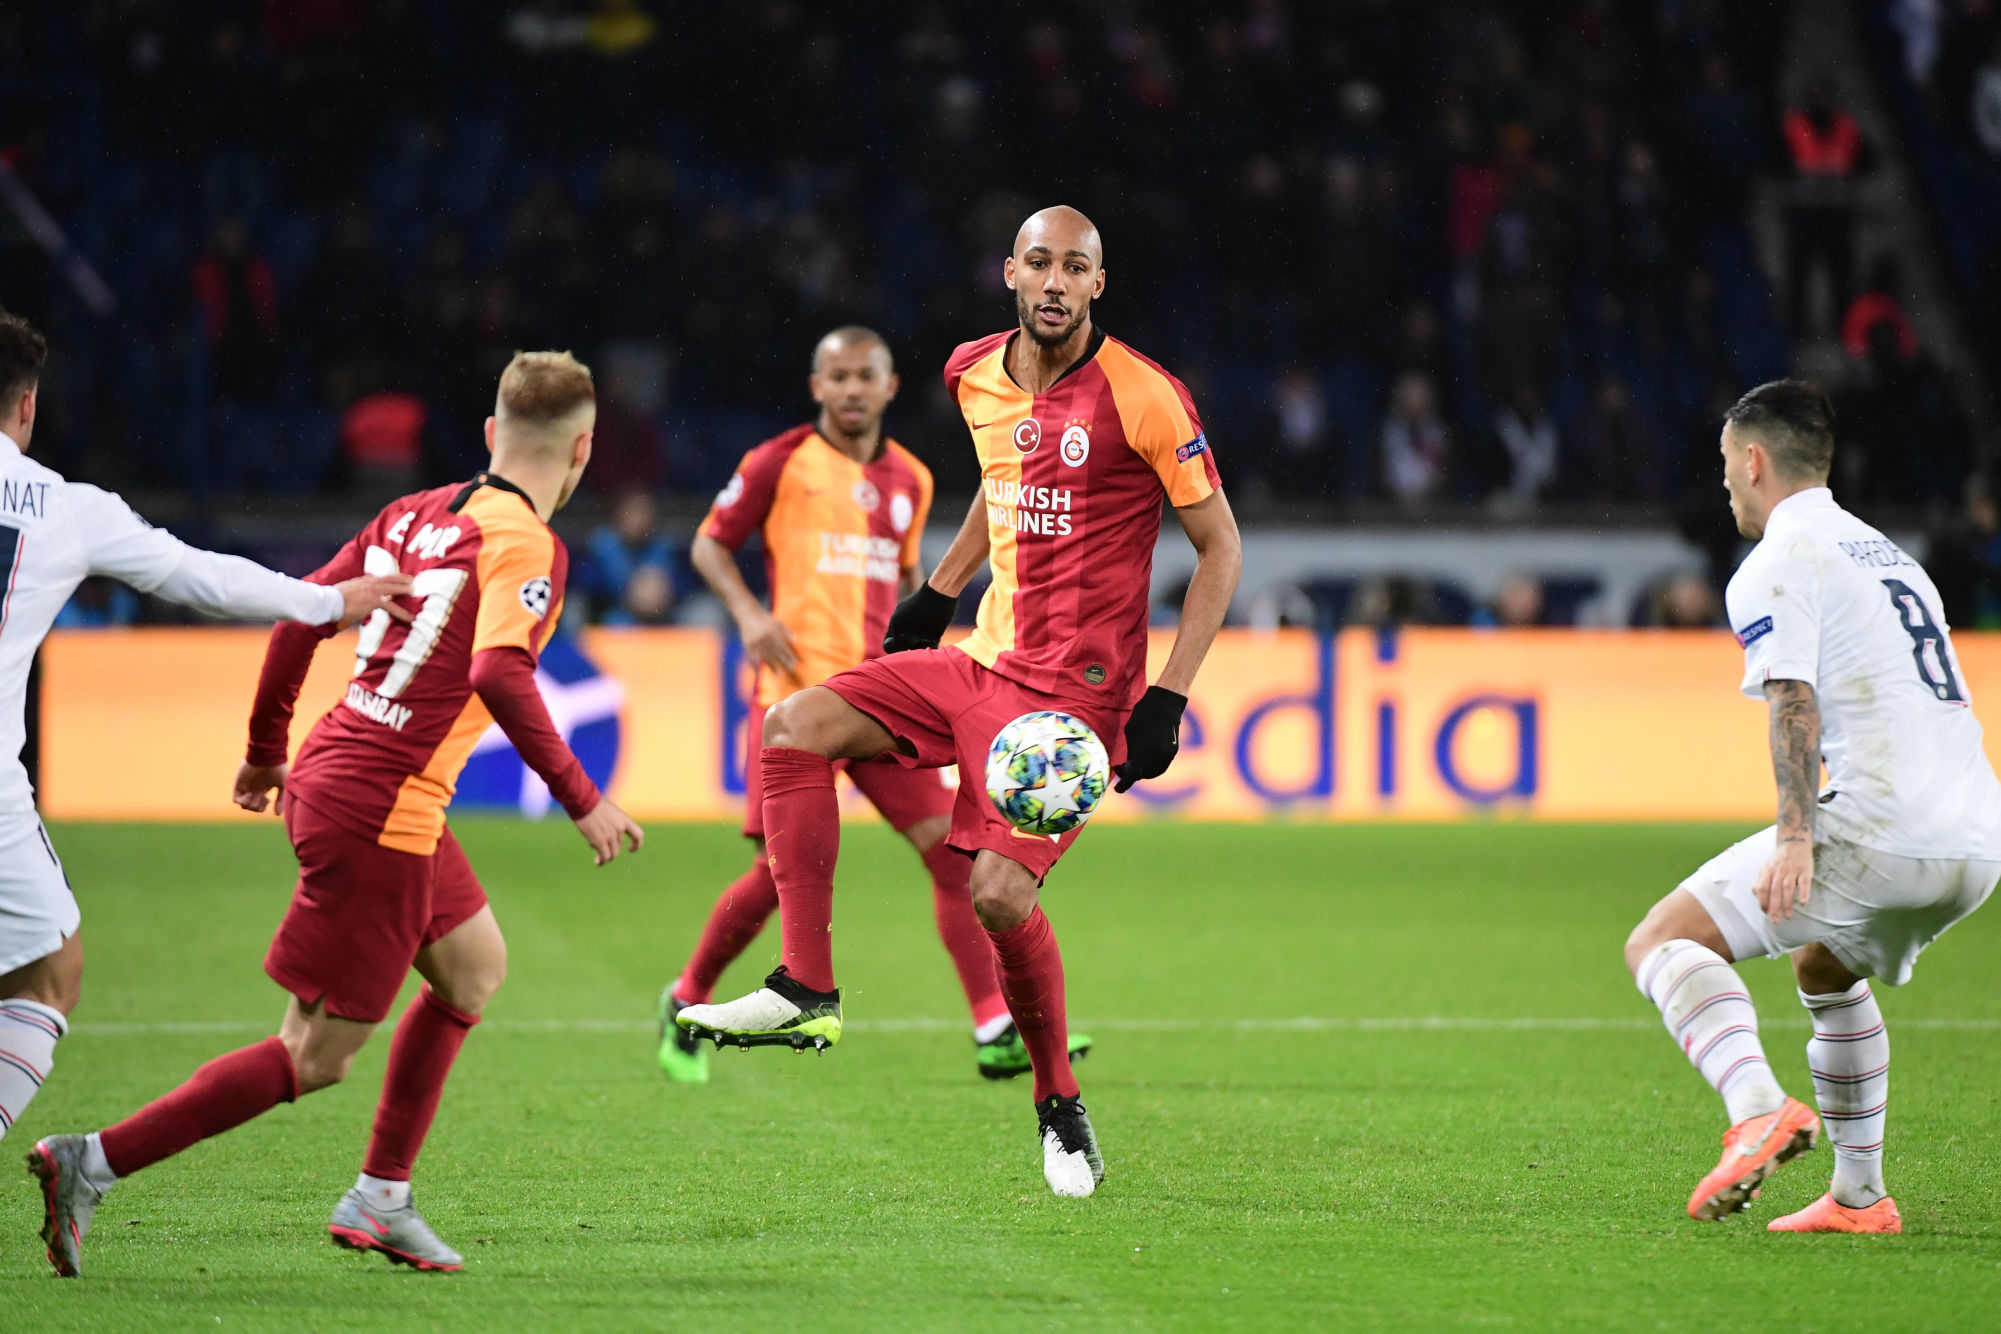 Steven NZONZI of Galatasaray during the Champions League match between Paris Saint Germain and Galatasaray at Parc des Princes on December 11, 2019 in Paris, France. (Photo by Dave Winter/Icon Sport) - Steven NZONZI - Parc des Princes - Paris (France)